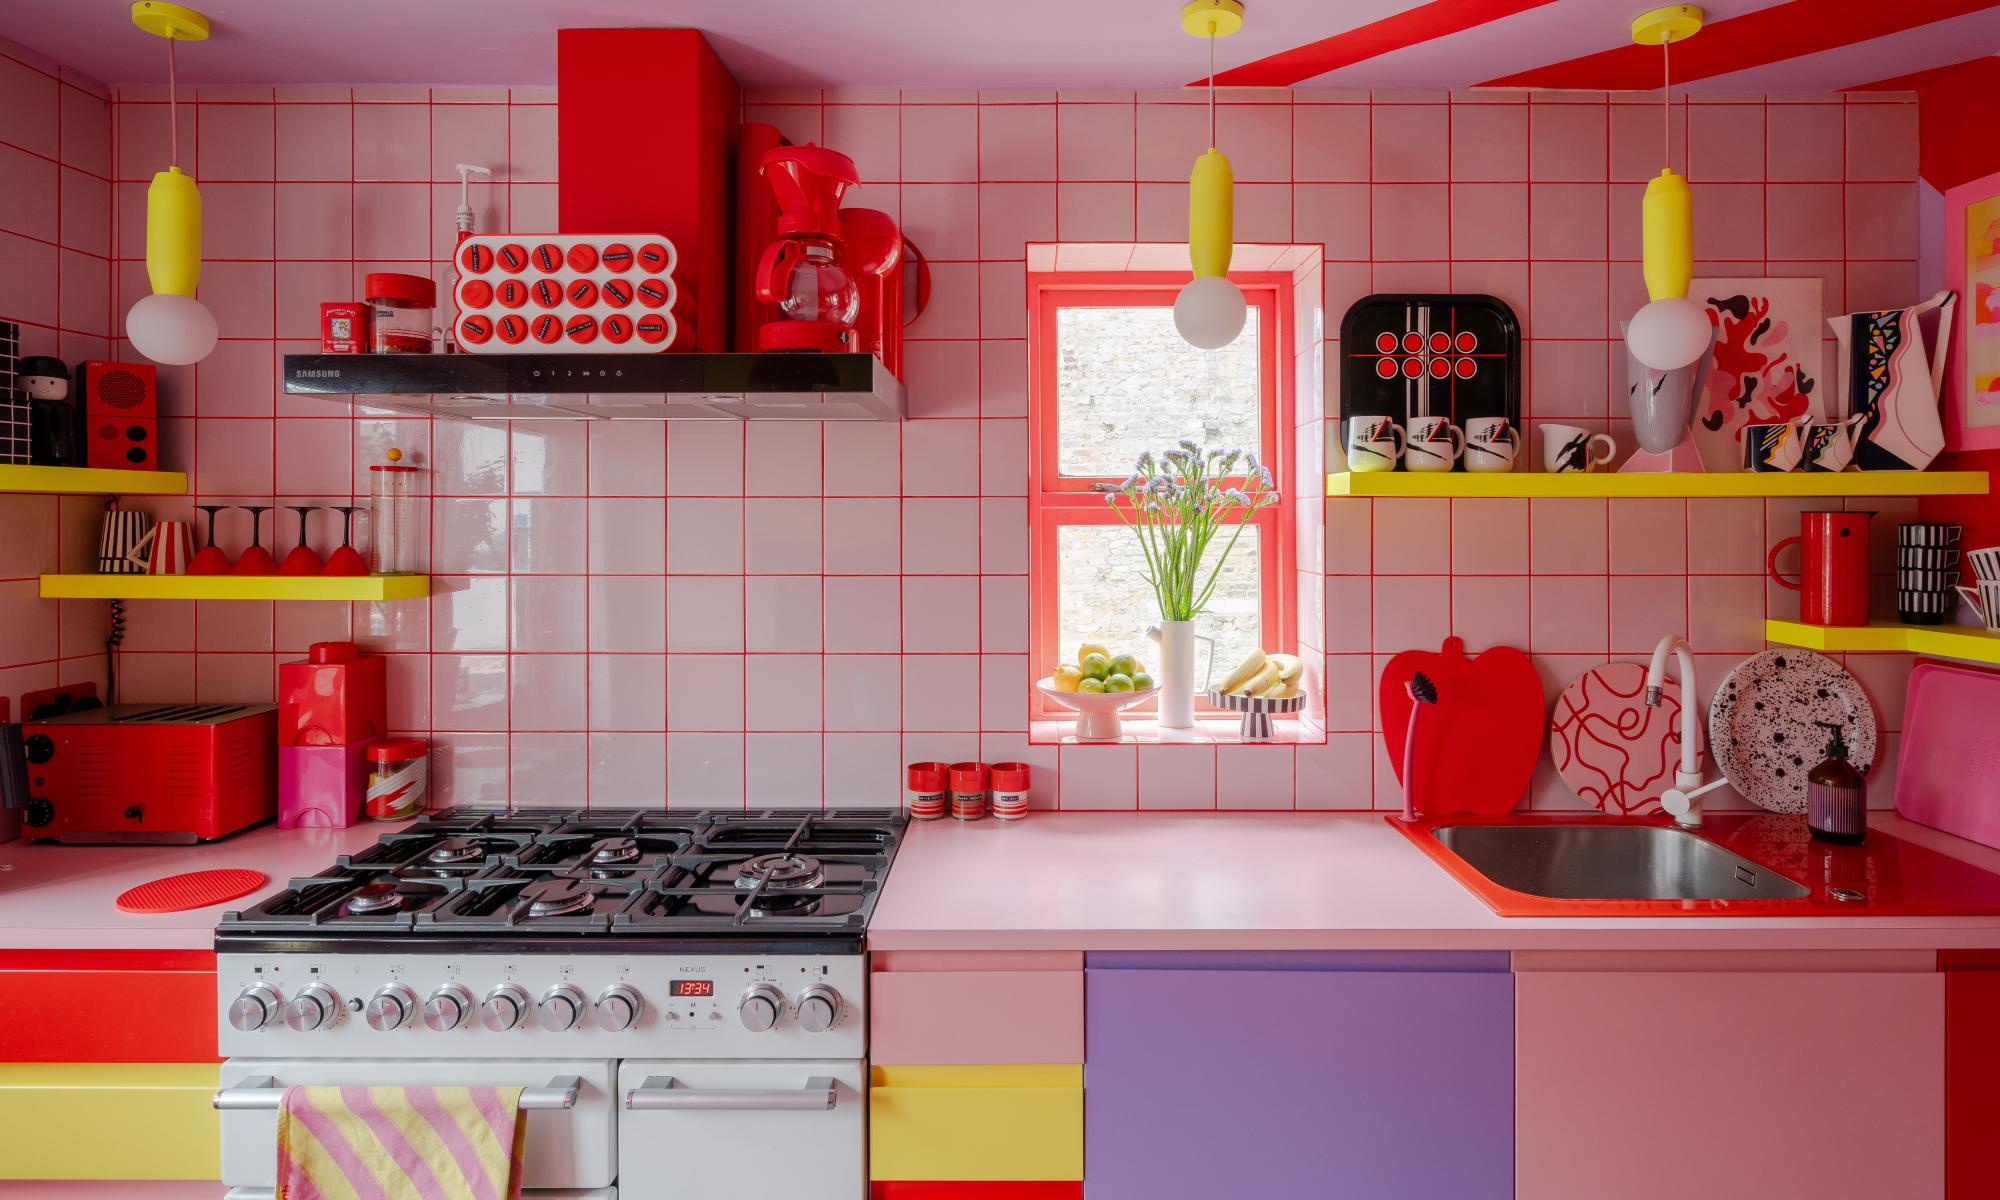 ‘kitschens’: how bubble-gum pink and retro appliances lend personality to hub of home